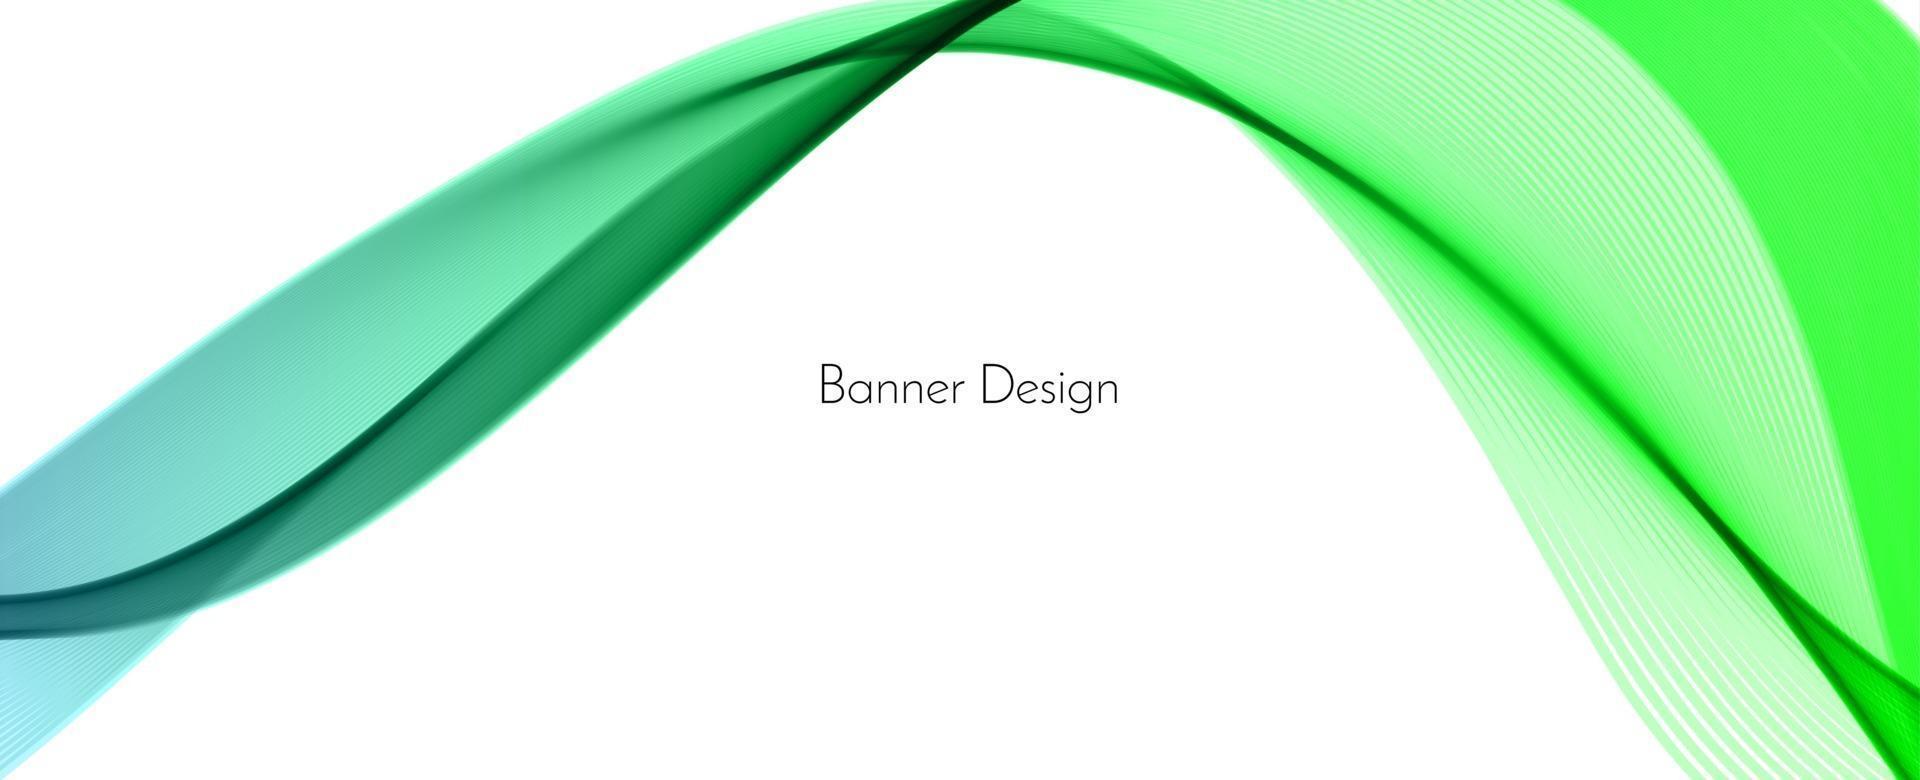 Abstract green modern decorative wave design banner background vector